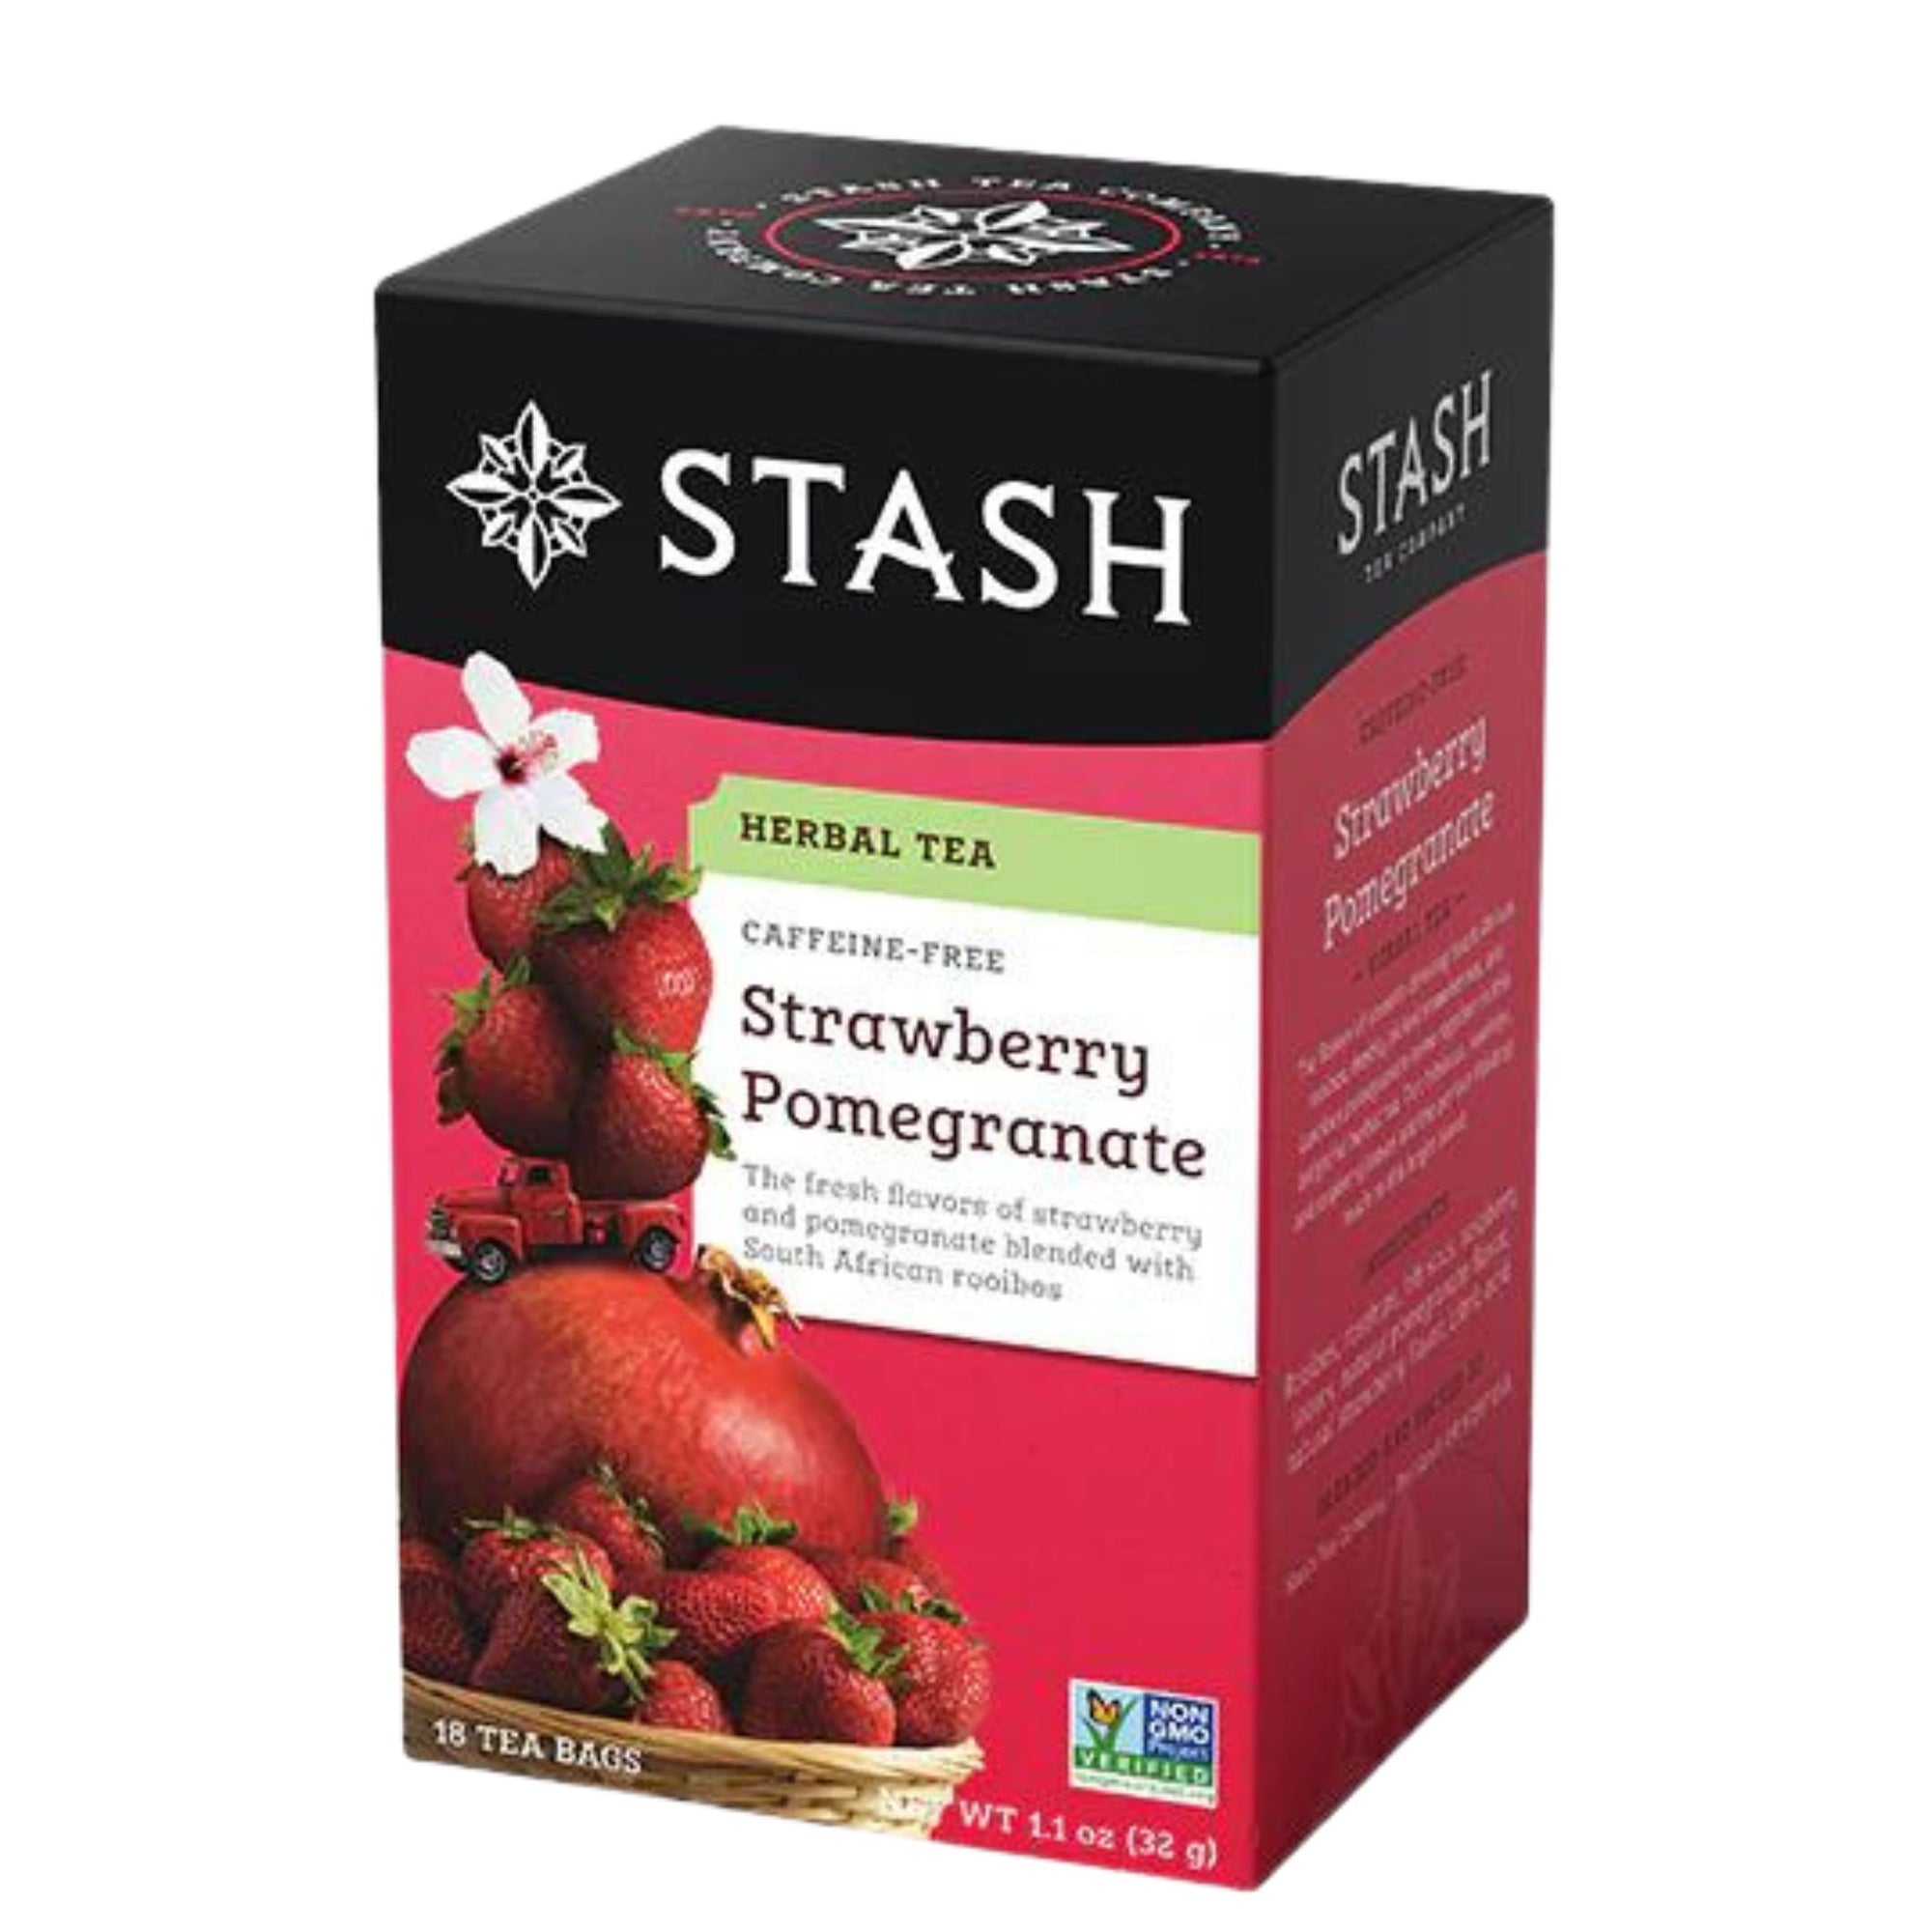 Stash Strawberry Pomegranate Herbal Tea - 18 tea bags in a box - The fresh flavours of strawberry and pomegranate blended with South African rooibos. 